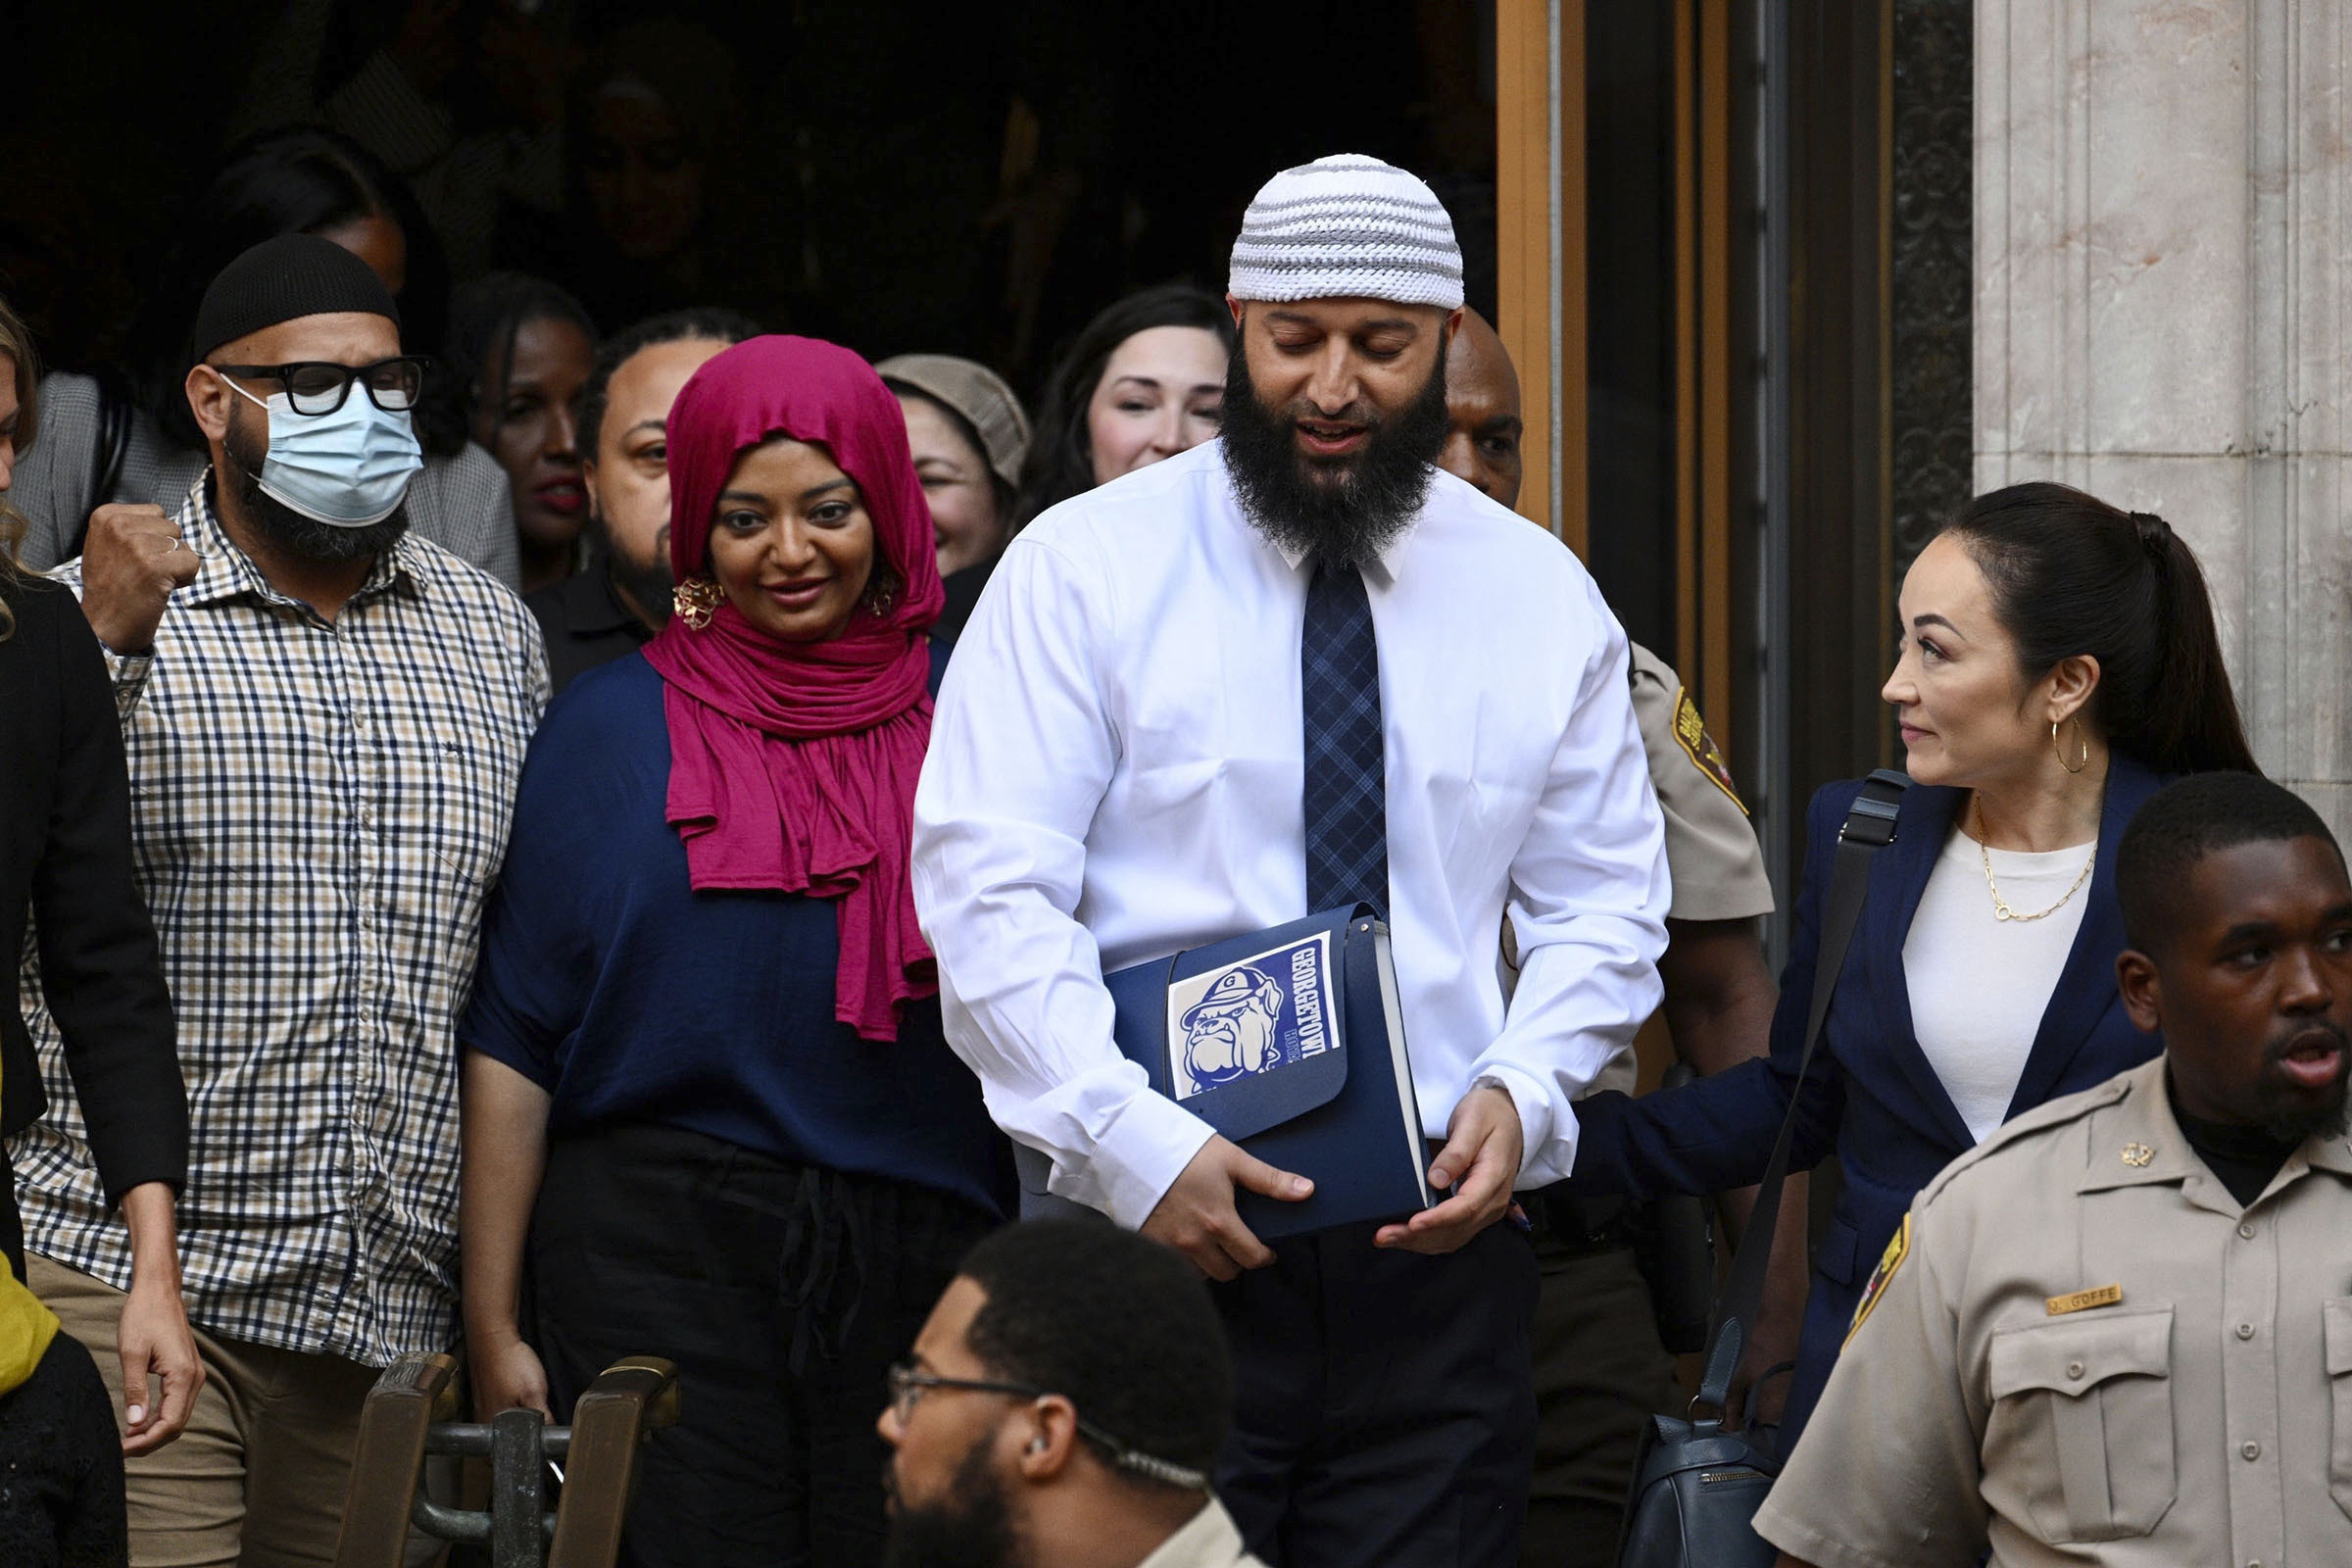 Adnan Syed, center right, leaves the courthouse after a hearing on Sept. 19, 2022, in Baltimore, Maryland.